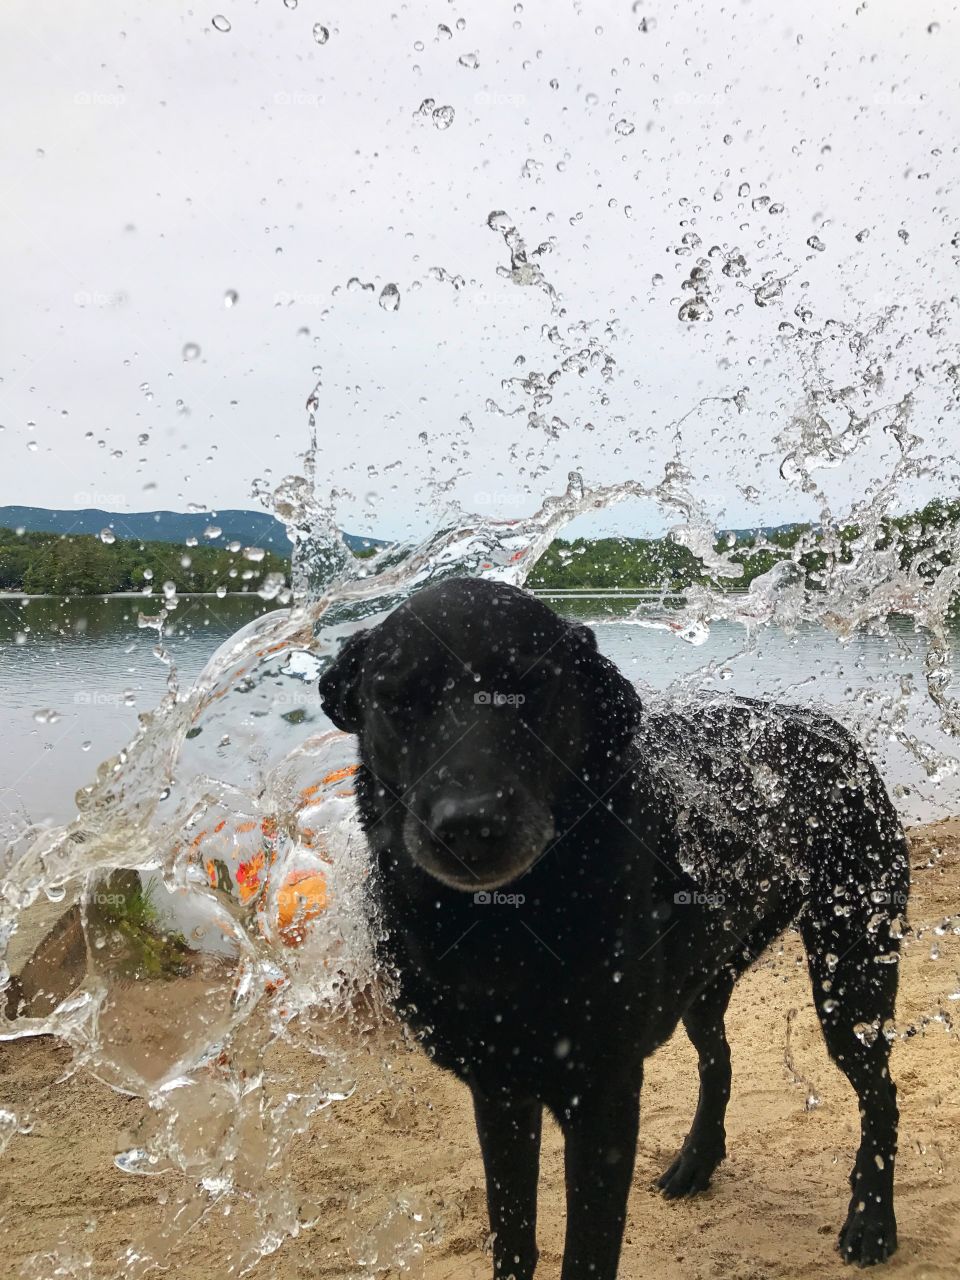 This a is cute lab trying to avoid the large amount of water coming his way